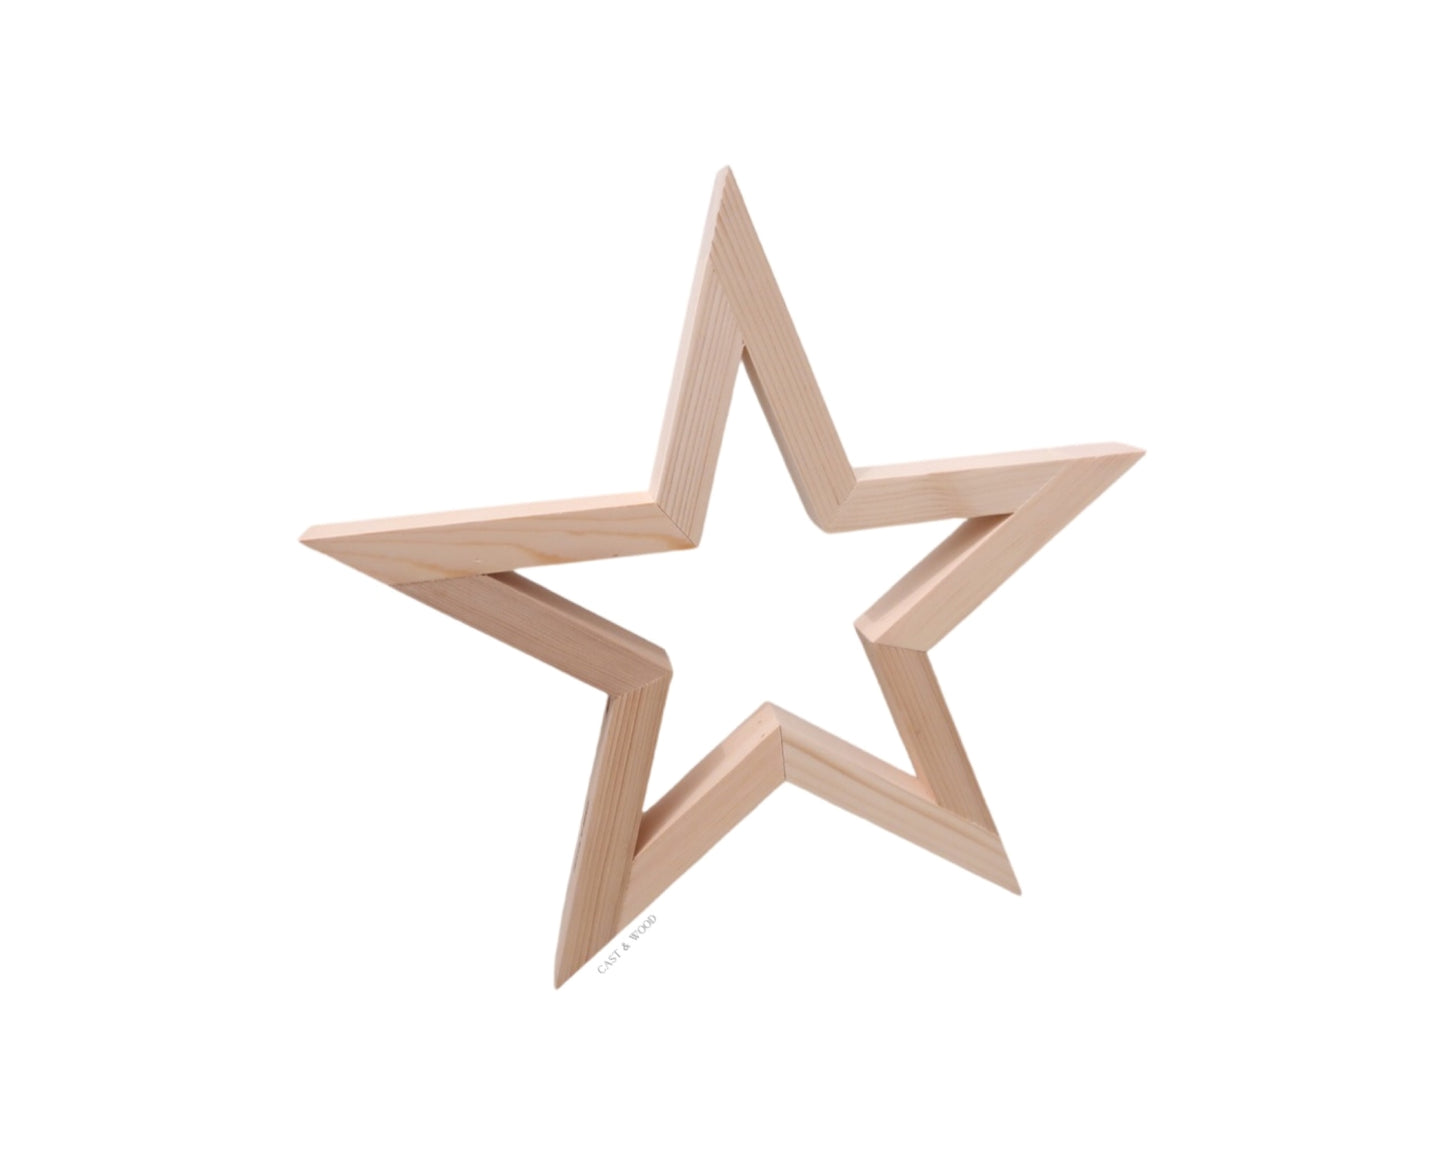 Wooden Star - Large